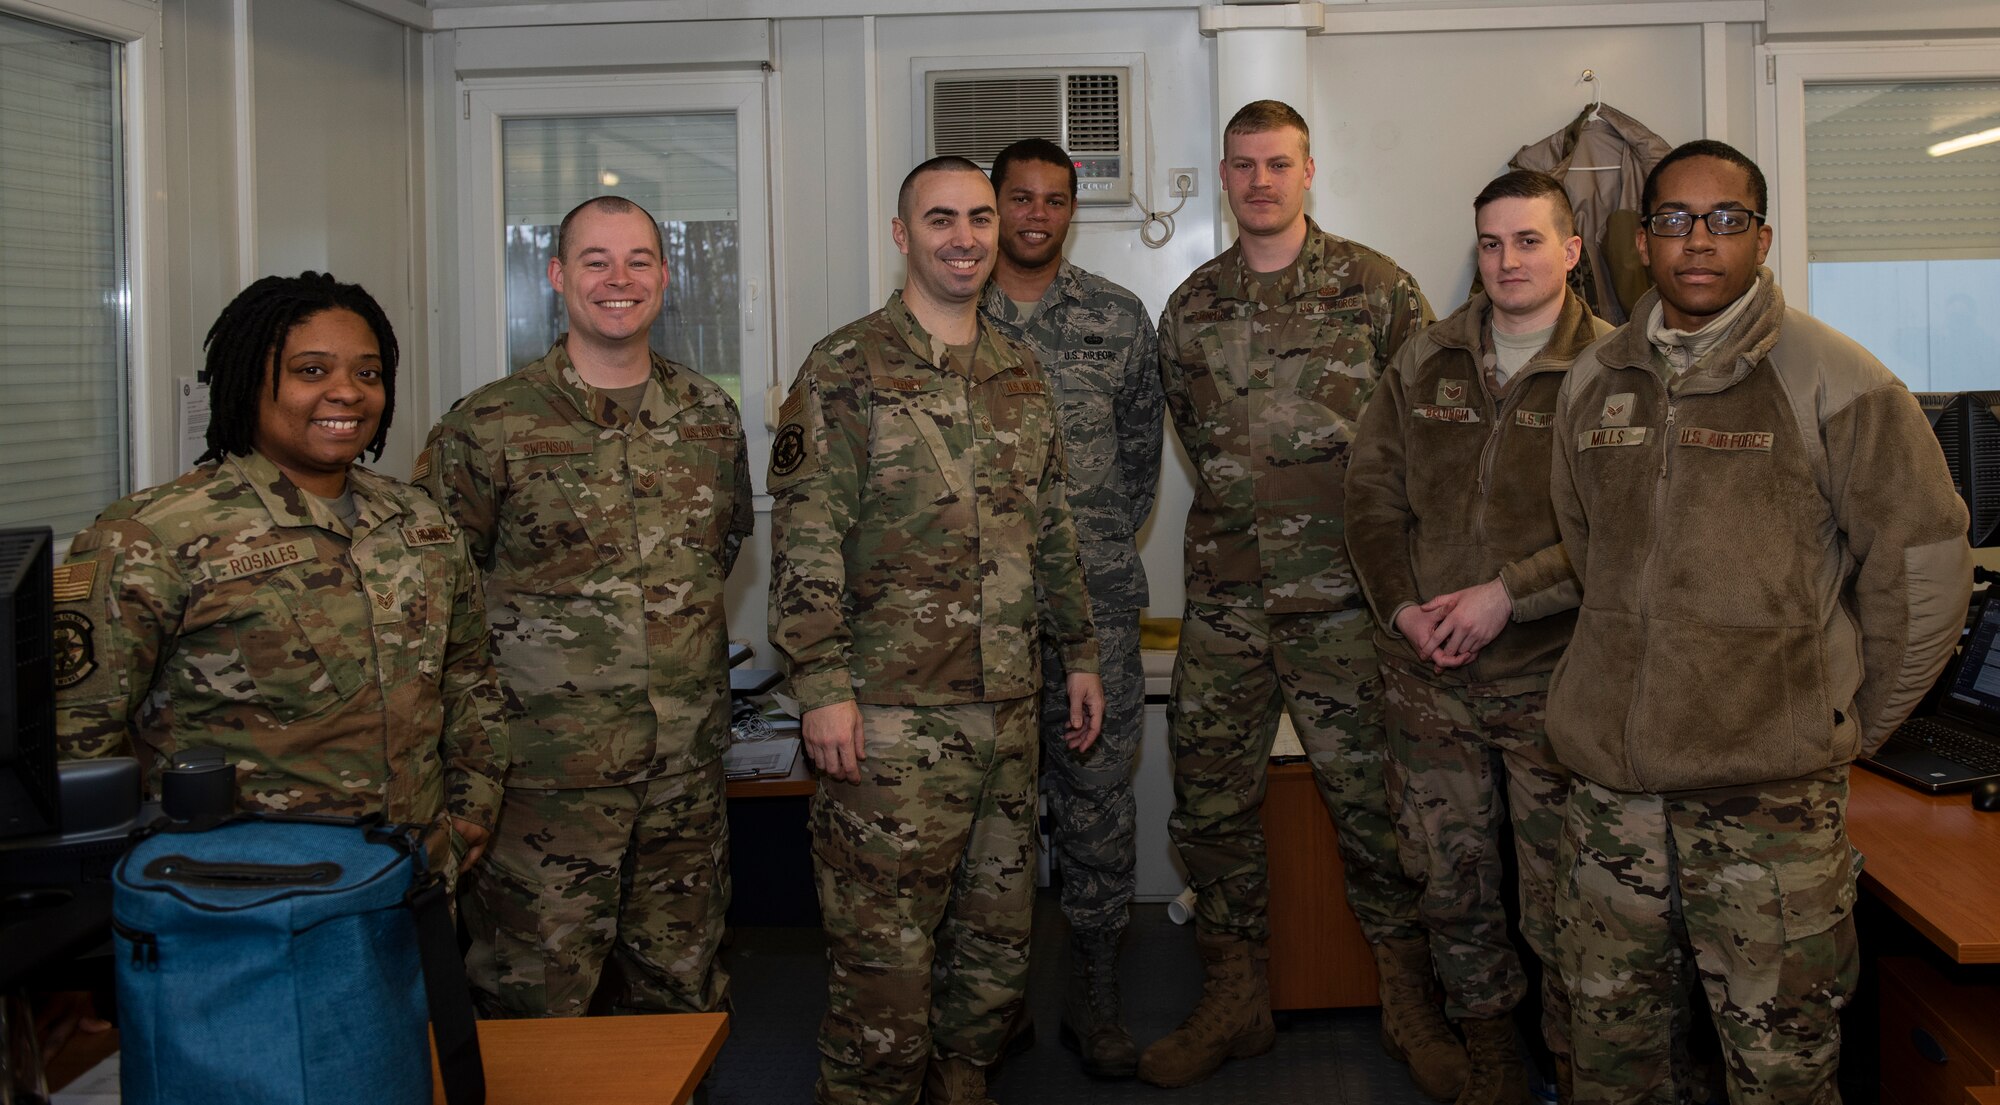 U.S. Air Force Master Sgt. Kevin Feeney, 701st Munitions Support Squadron first sergeant, third from the left, poses for a photo with 701st MUNSS communications flight Airmen at Kleine Brogel Air Base, Belgium, January 24, 2020. Feeney is responsible for first sergeant duties for more than 150 Airmen at Kleine Brogel Air Base and maintains a close relationship with them while stationed at the geographically separated unit. (U.S. Air Force photo by Airman 1st Class Alison Stewart)